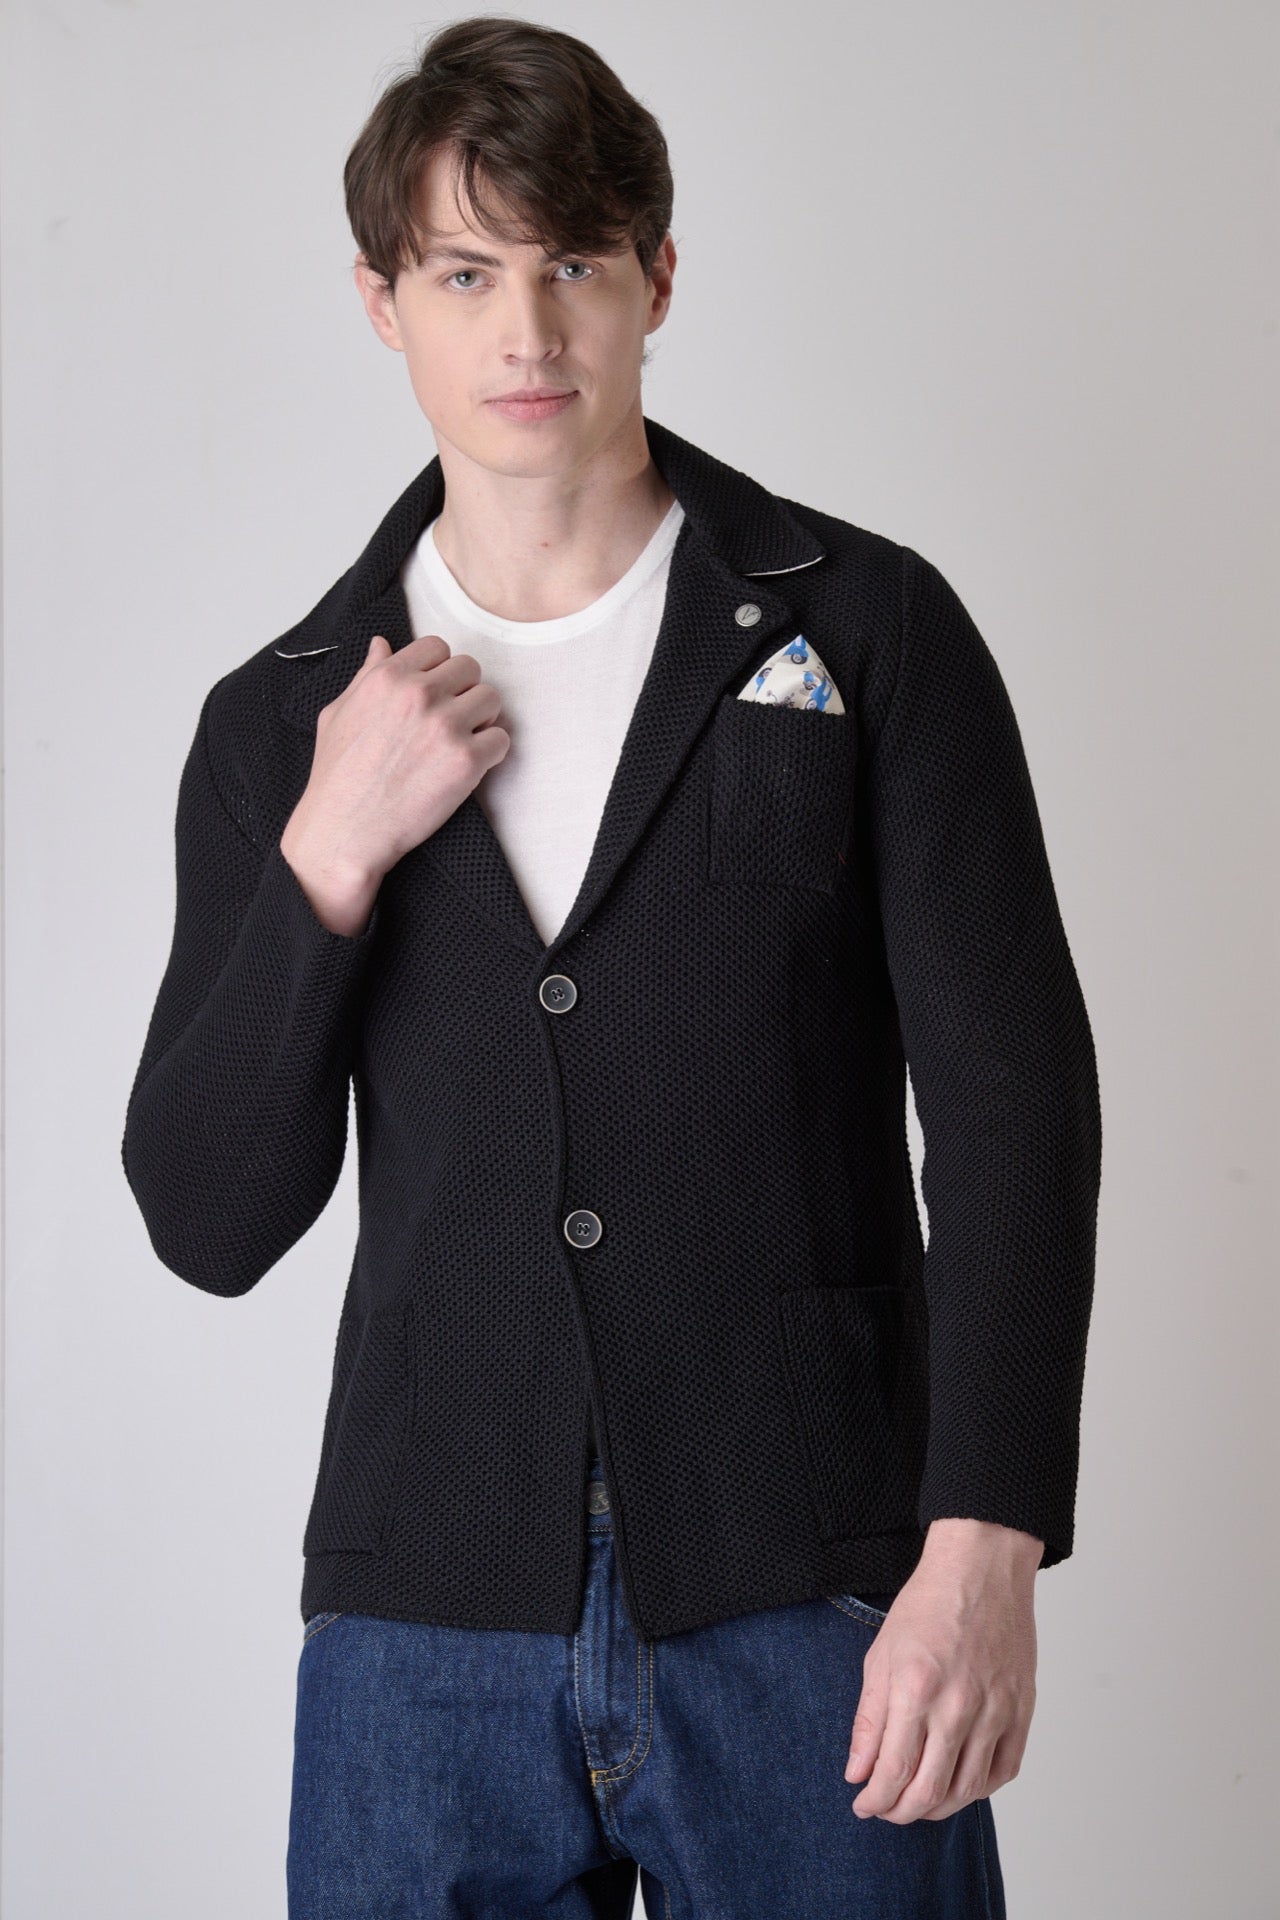 Single-breasted Black Partridge Eye jacket with inner collar and pocket square in V2 fabric